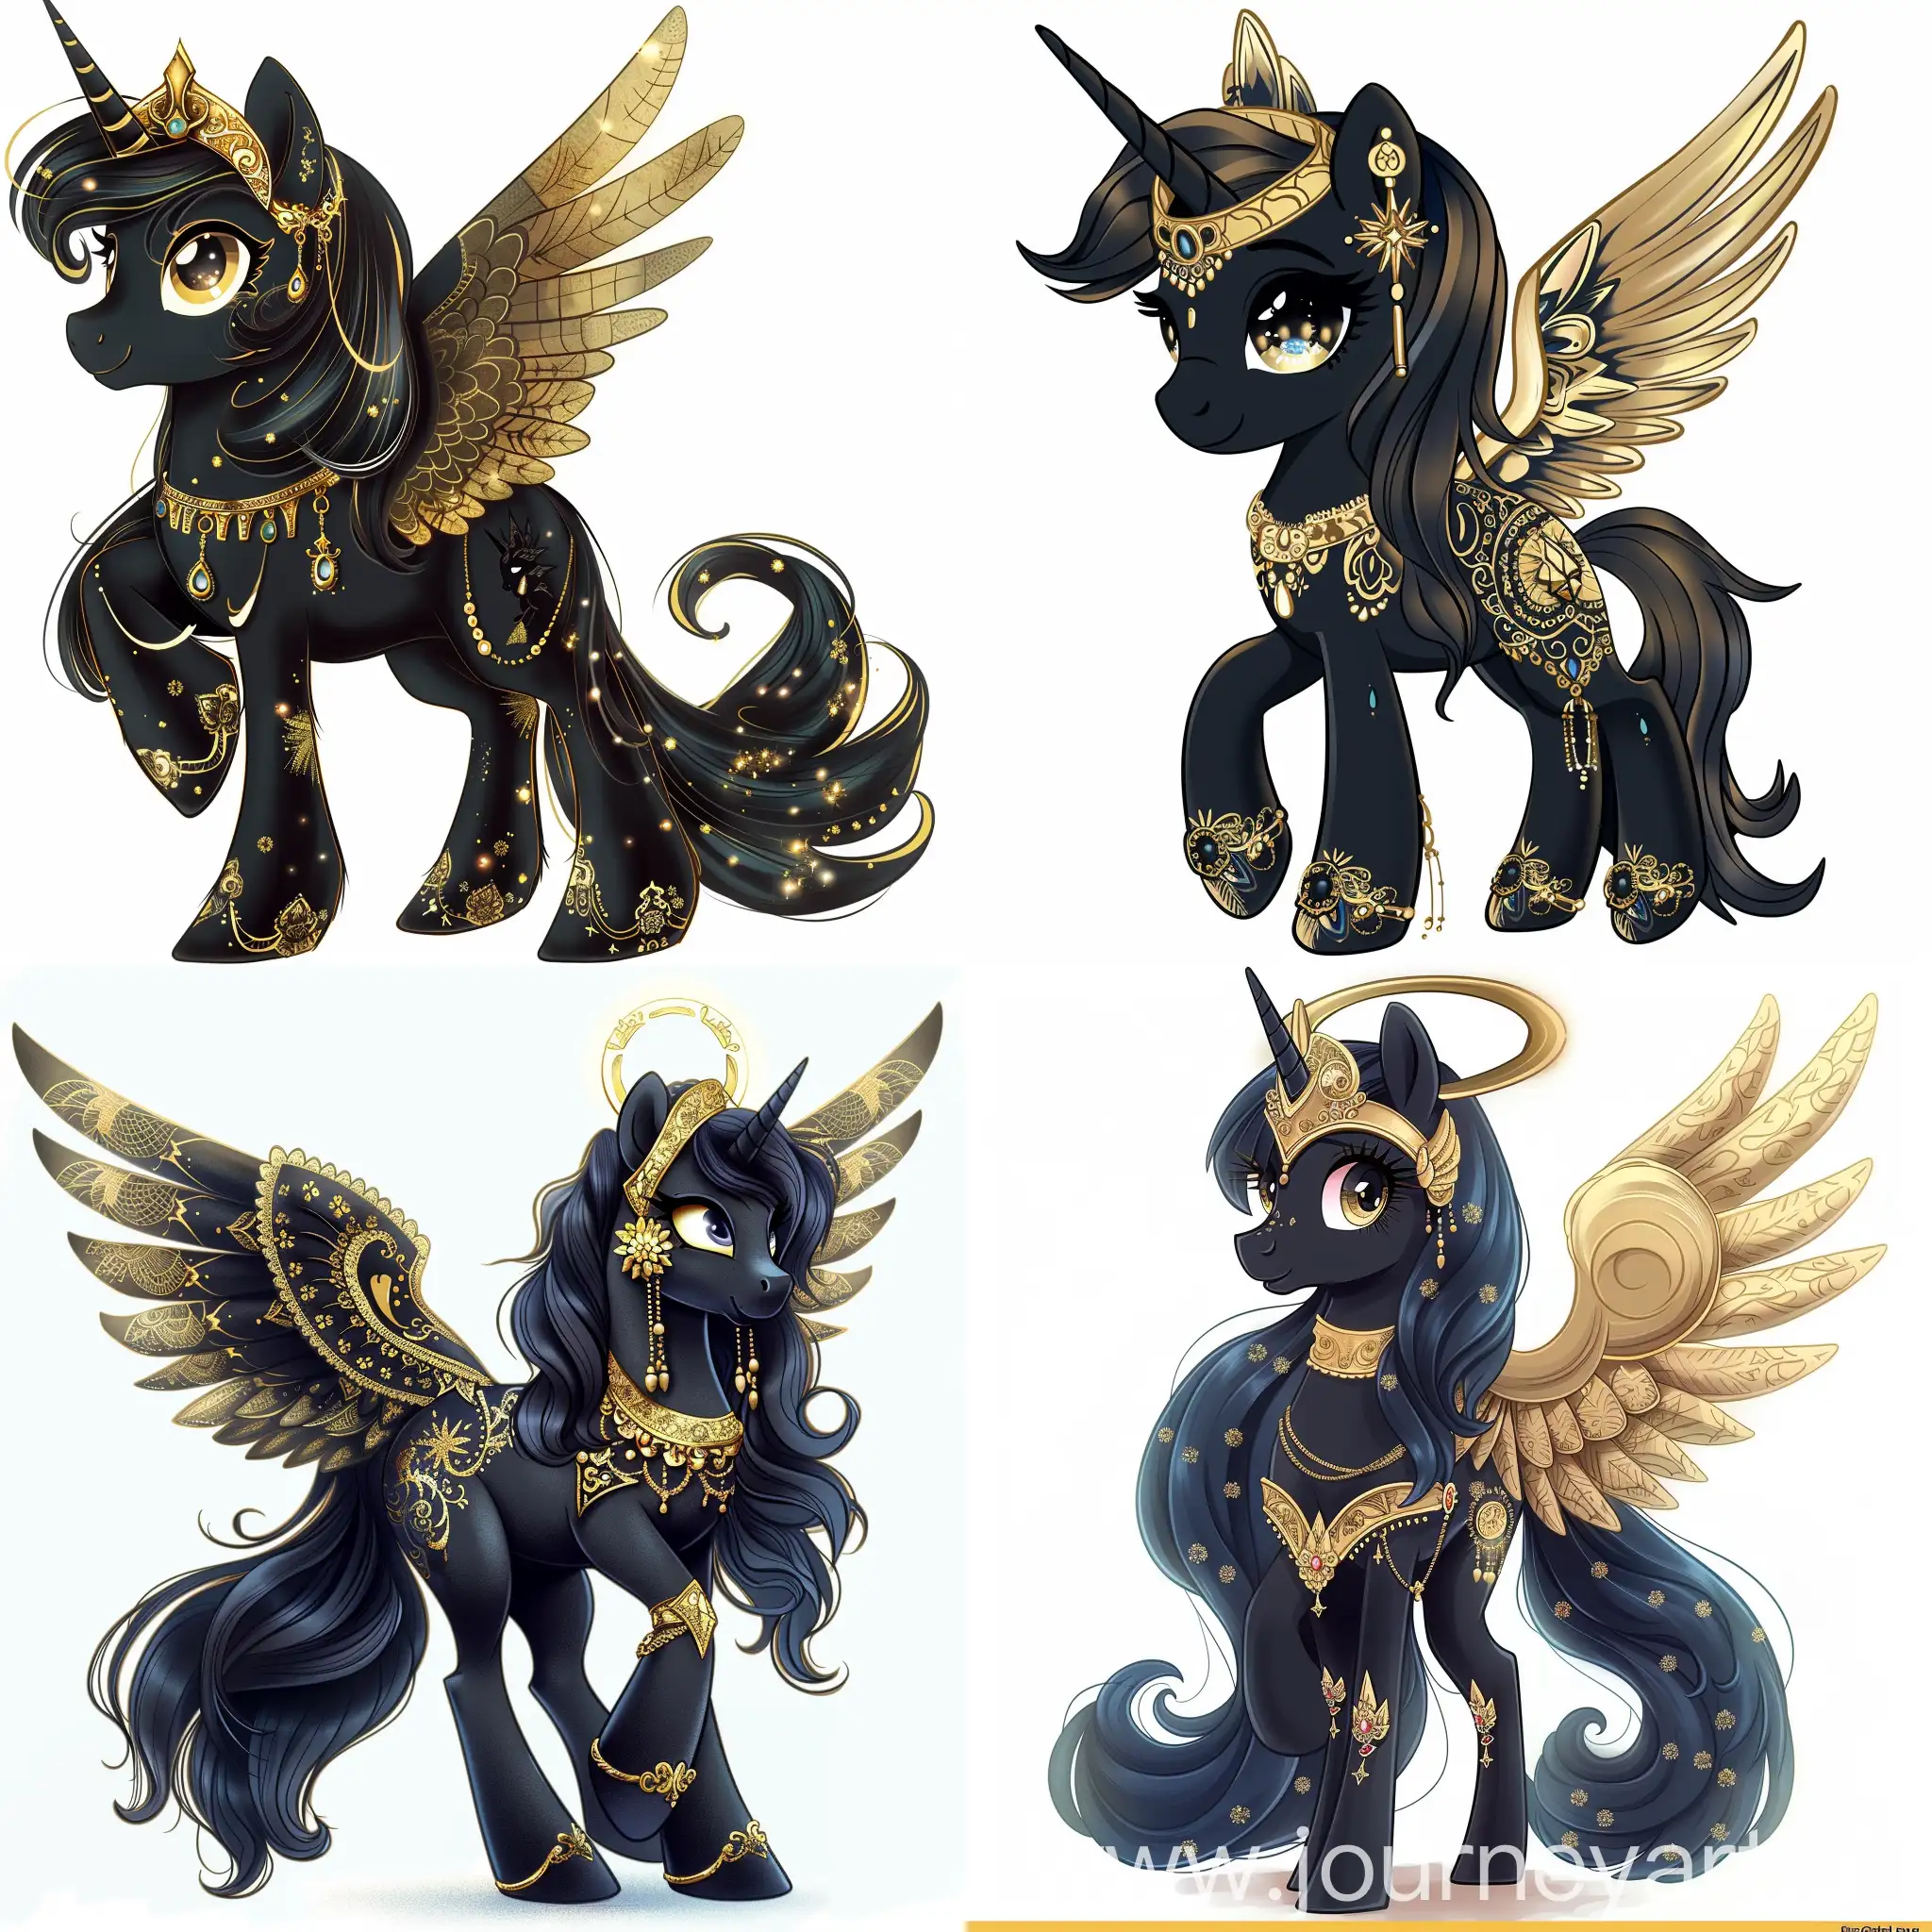 Black pony, Gold jewelry, gold patterns, six wings, halo, reference, cartoon character, my little pony